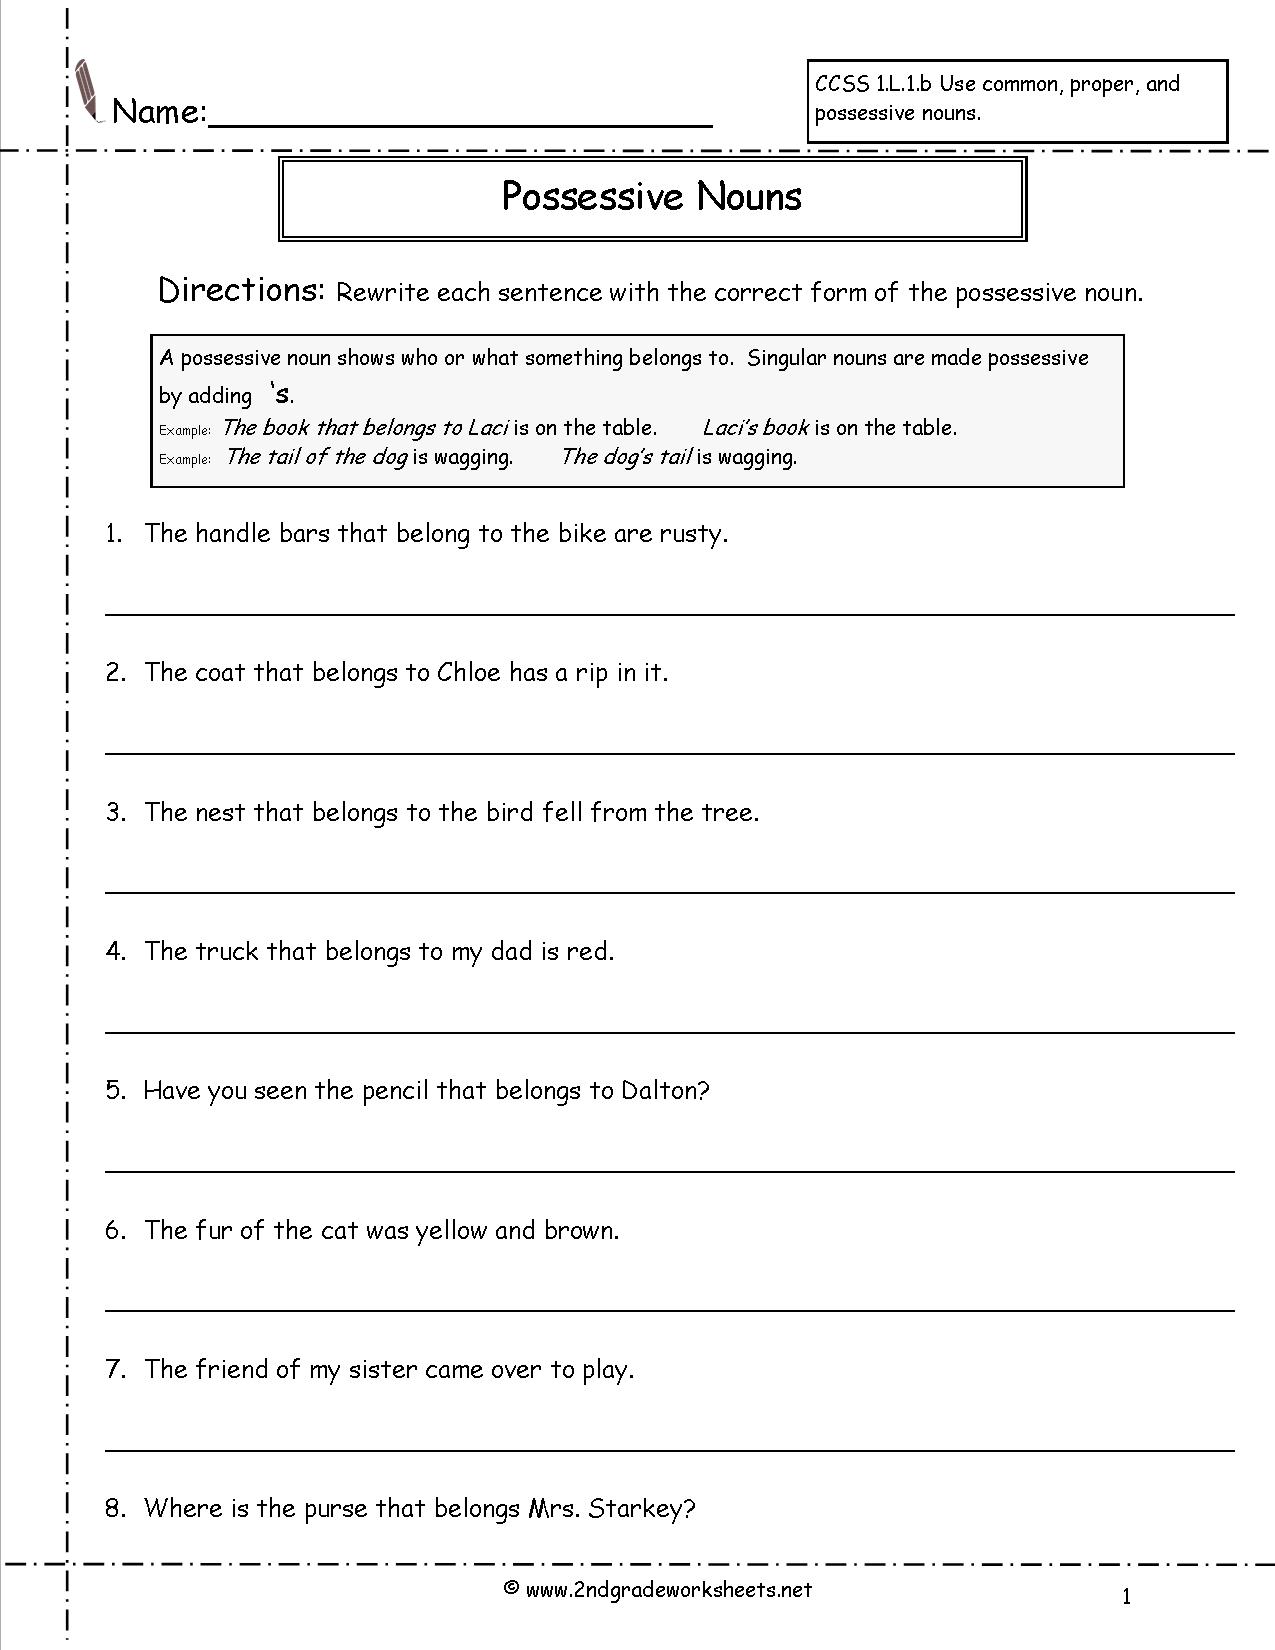 18 Best Images Of Possessive Nouns Printable Worksheets Plural Possessive Nouns Worksheets